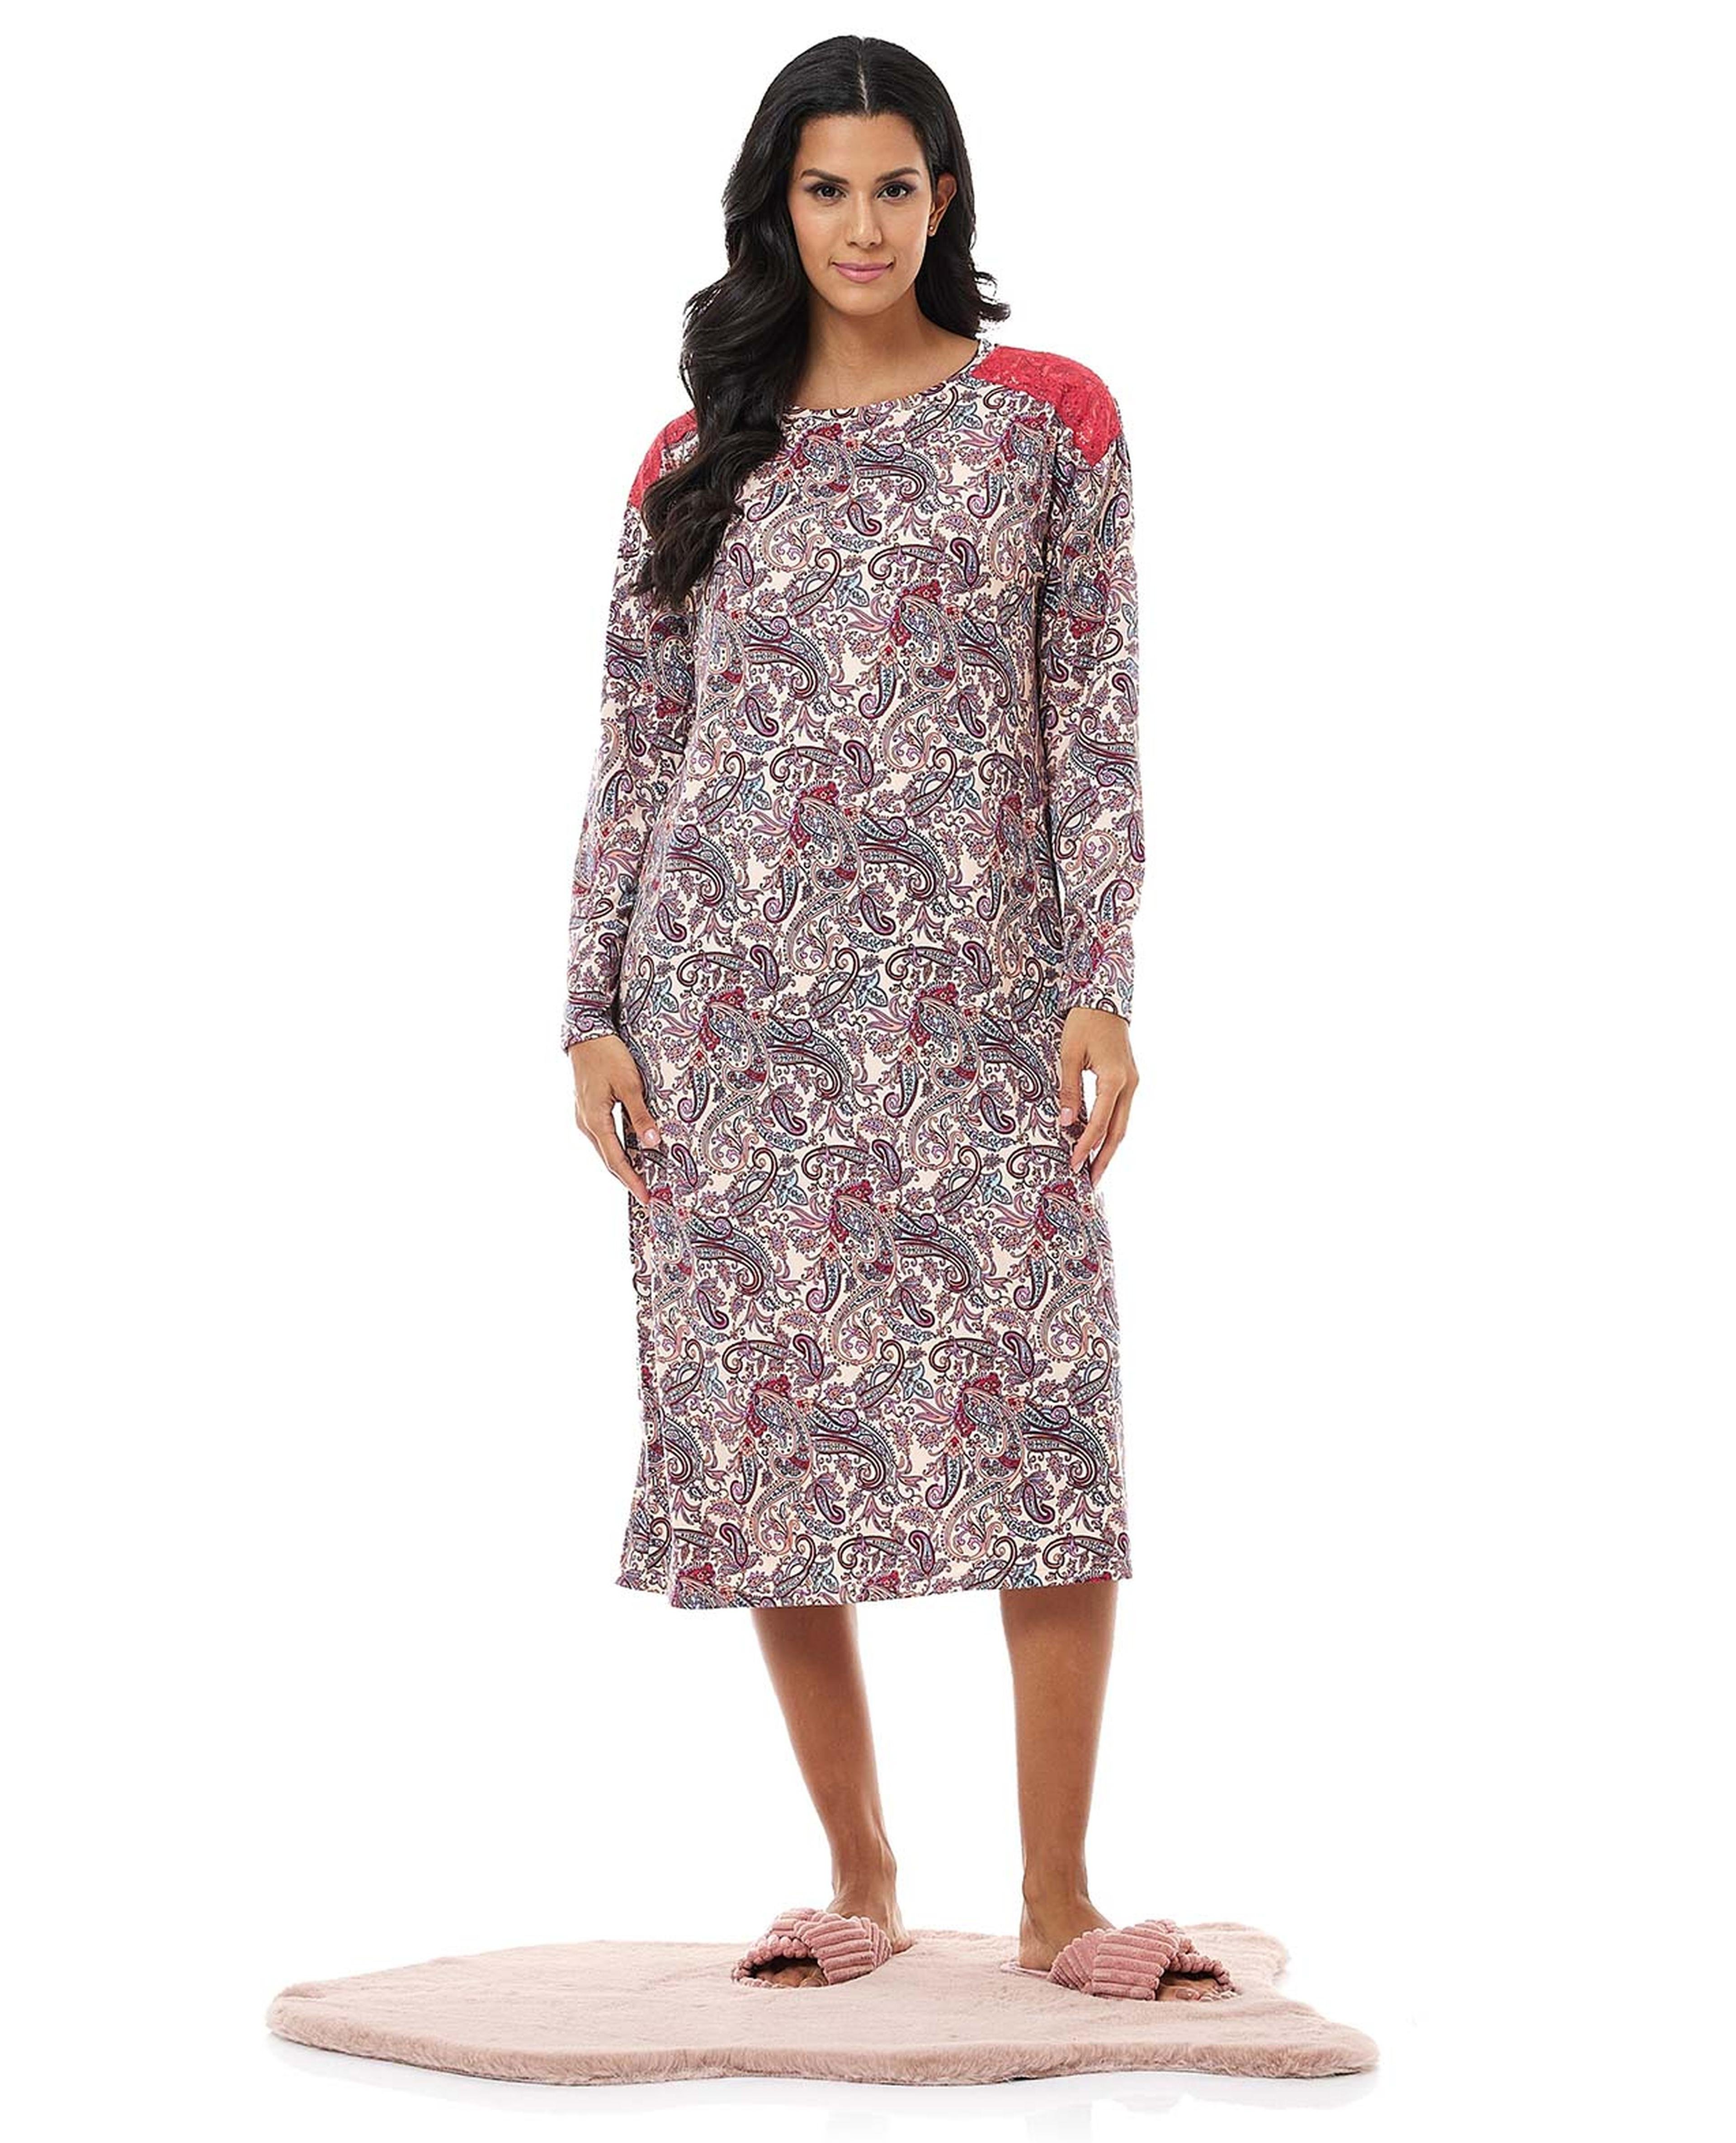 Paisley Patterned Nightgown